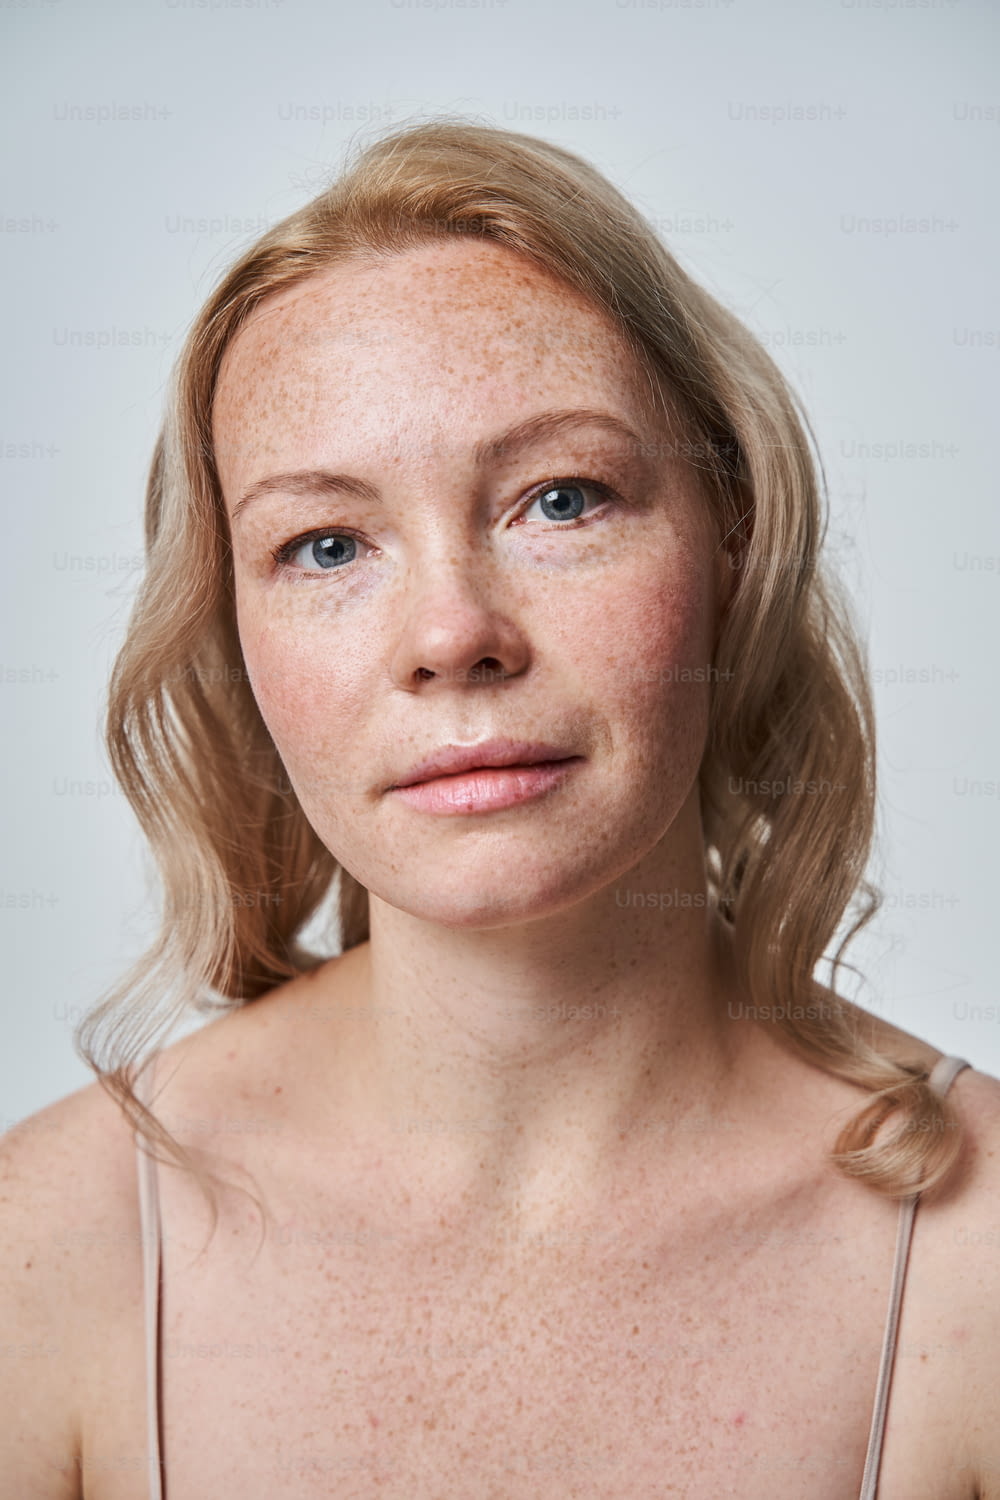 Young beautiful freckles woman face portrait with healthy skin. Vertical portrait view of the dreamy lady with perfect skin. Female appearance and cosmetology concept. Stock photo